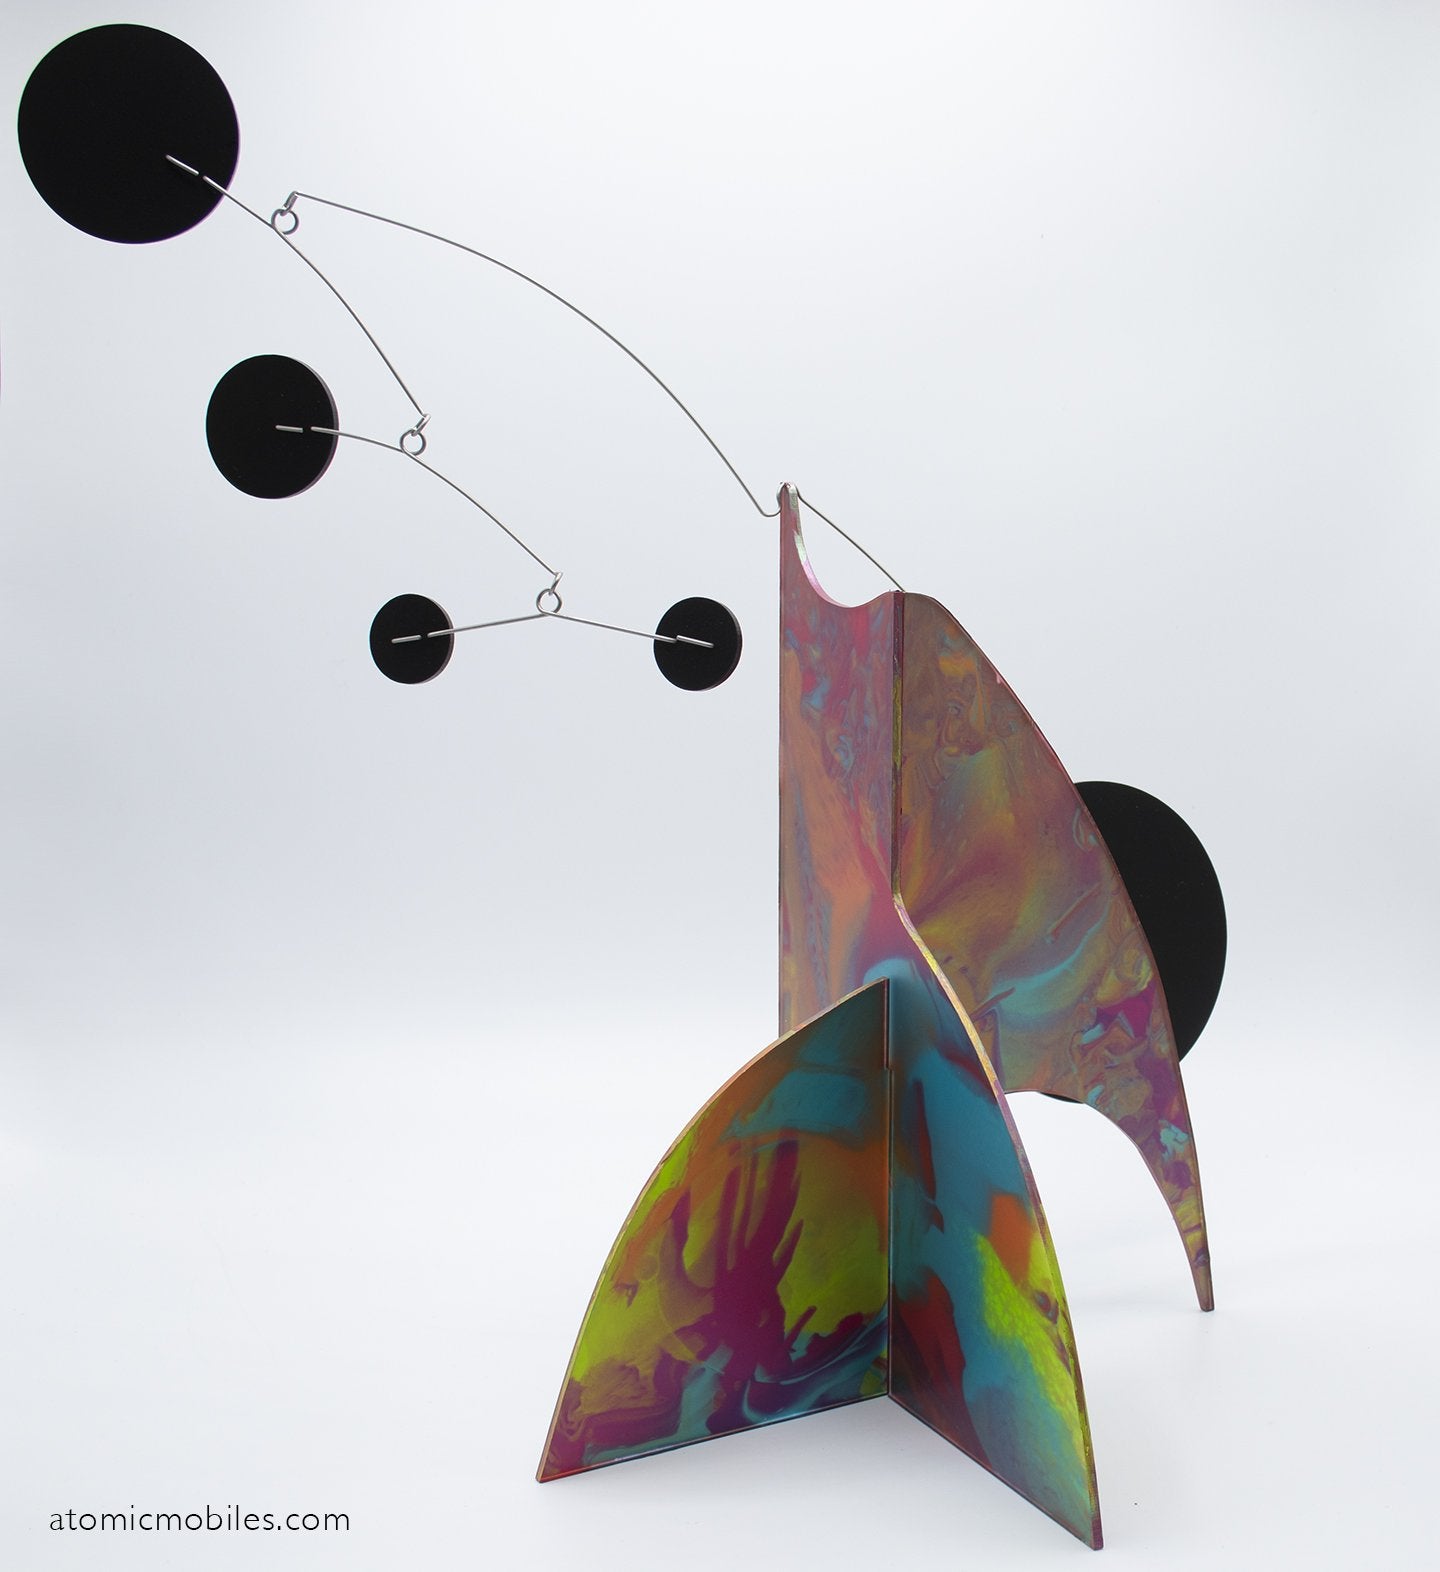 Eloquent Hand Painted Stabile Sculpture #1 - Atomic Mobiles Fine Art